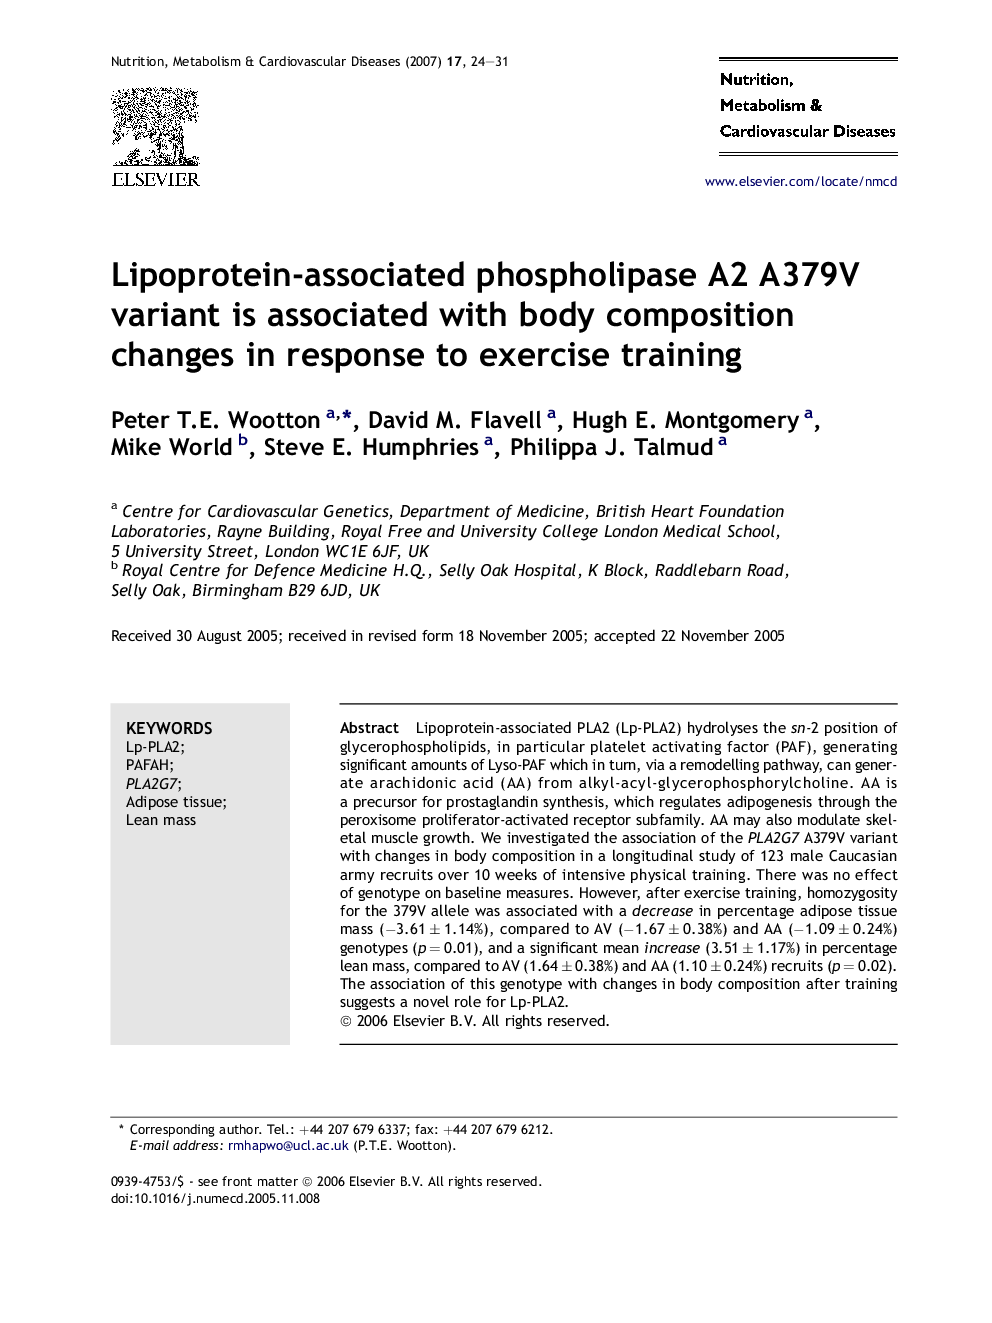 Lipoprotein-associated phospholipase A2 A379V variant is associated with body composition changes in response to exercise training